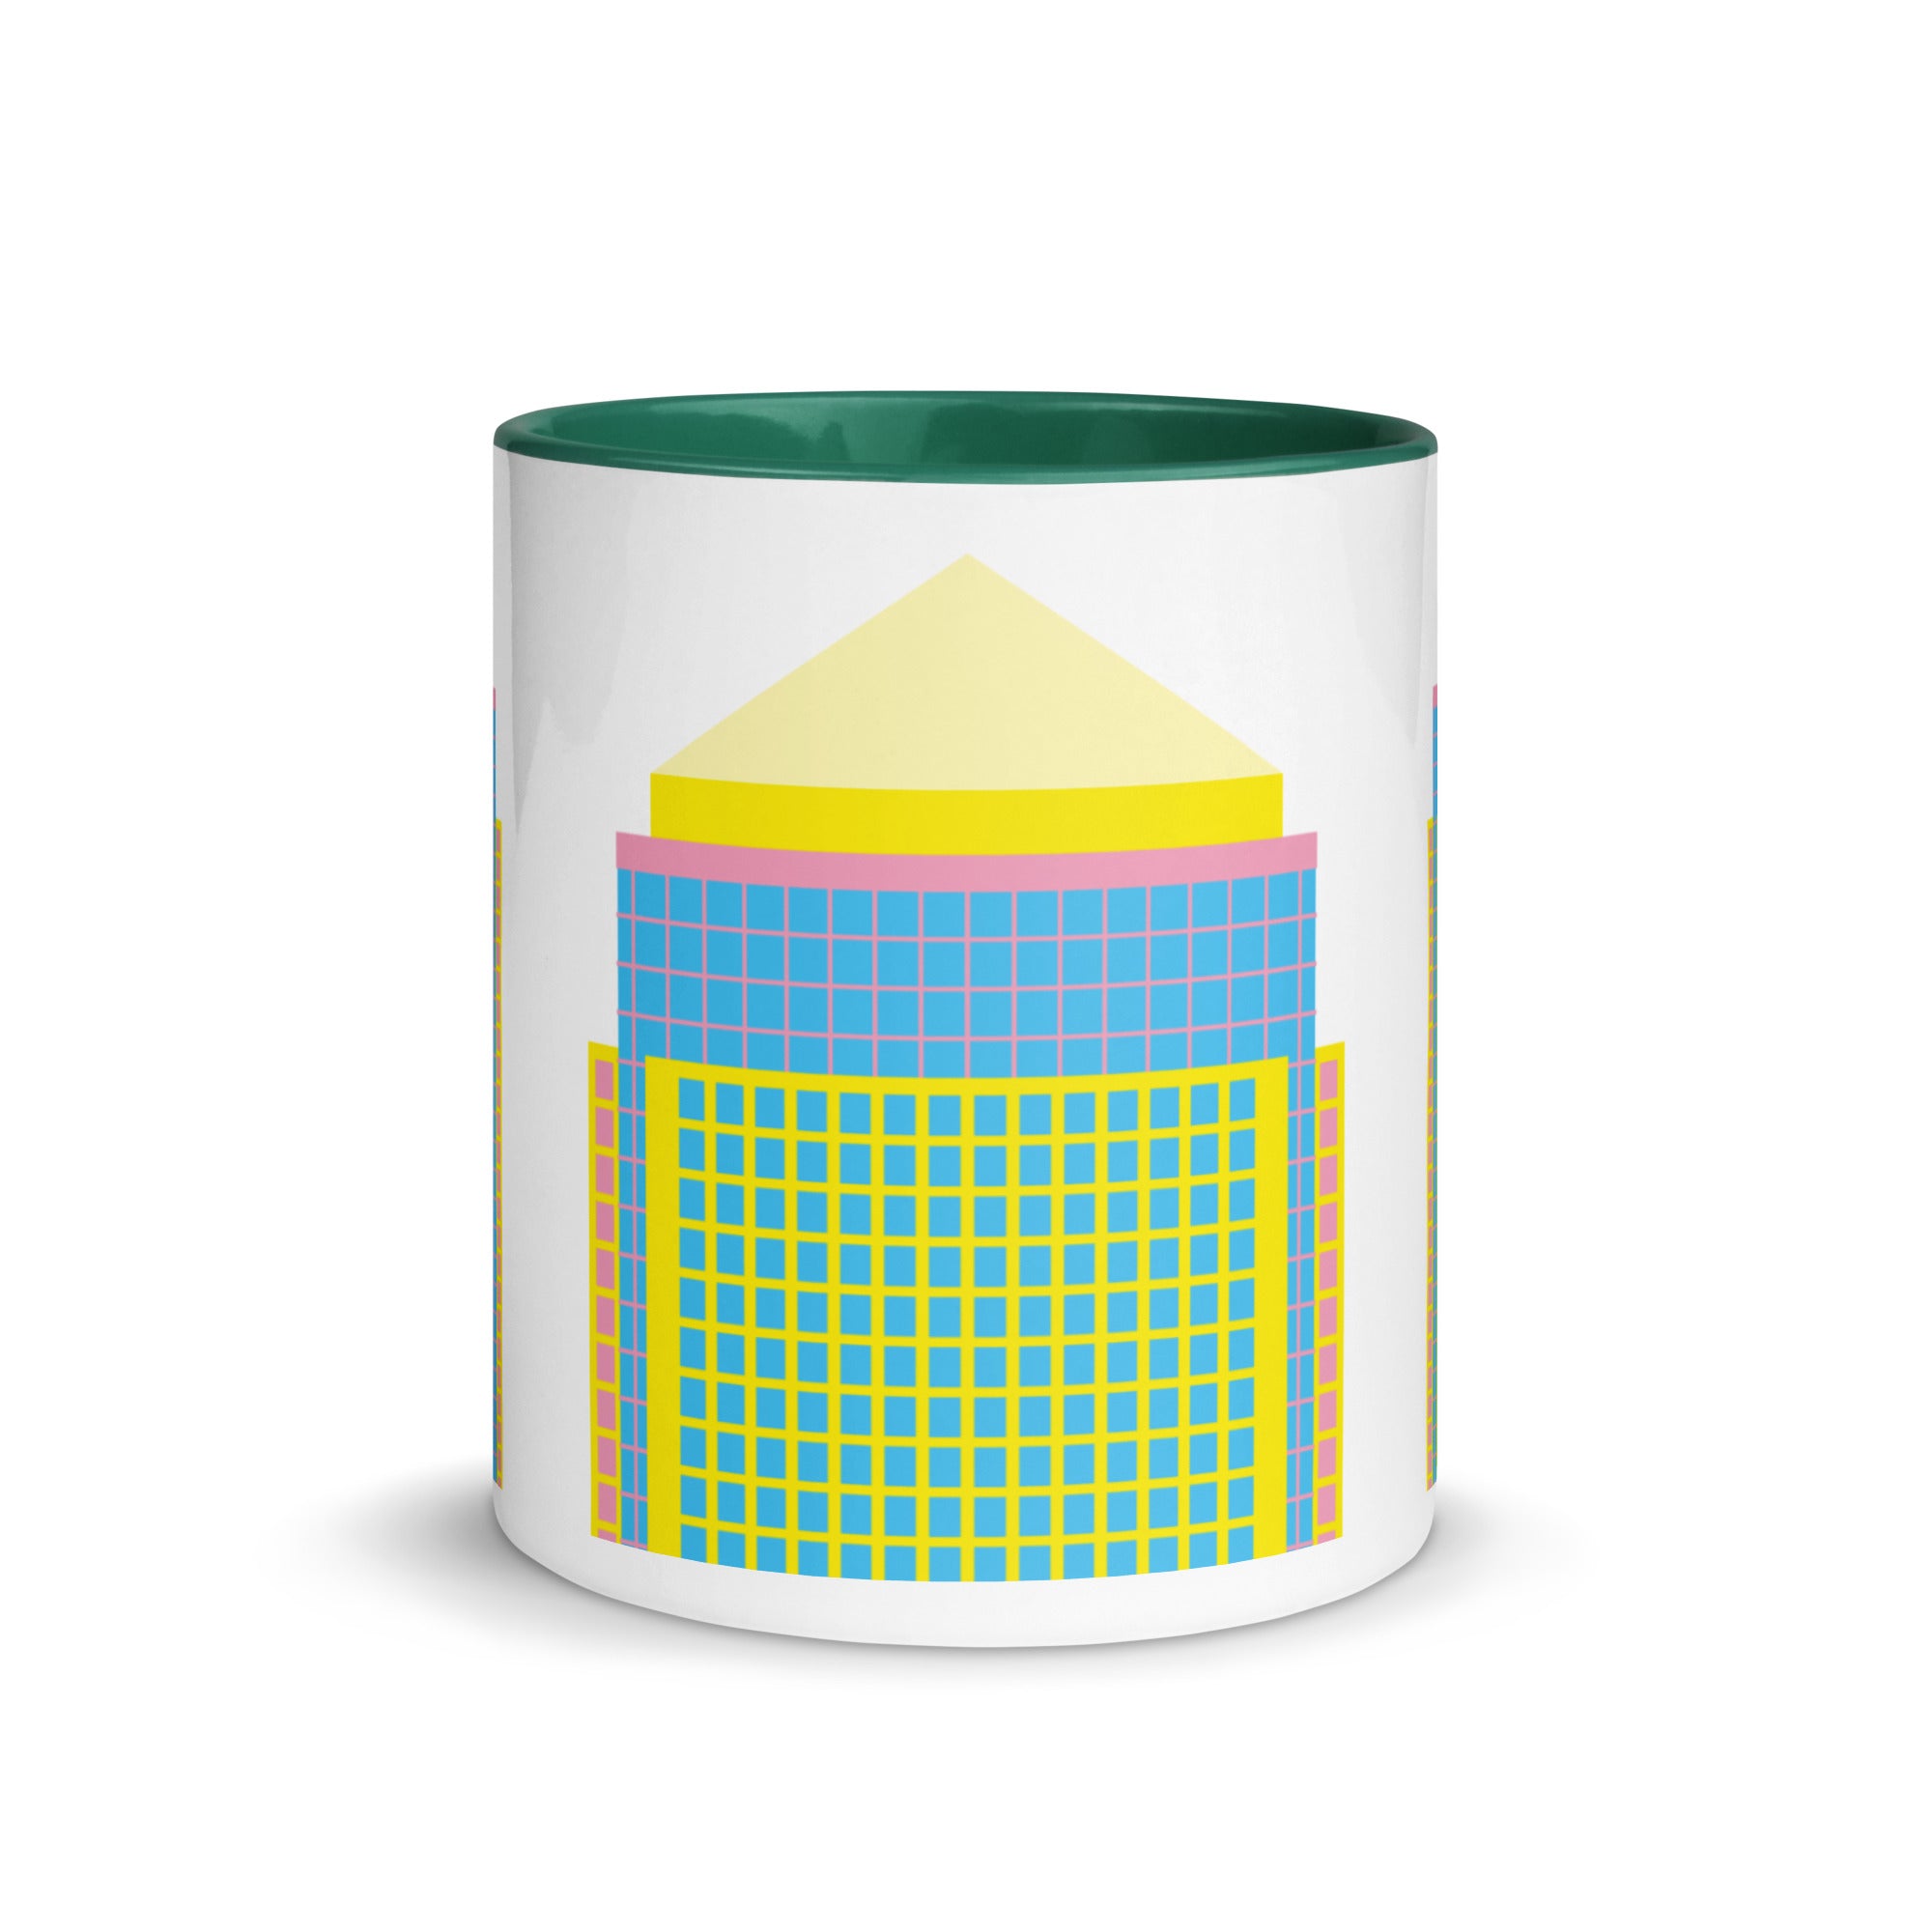 One Canada Square Different Coloured Mugs